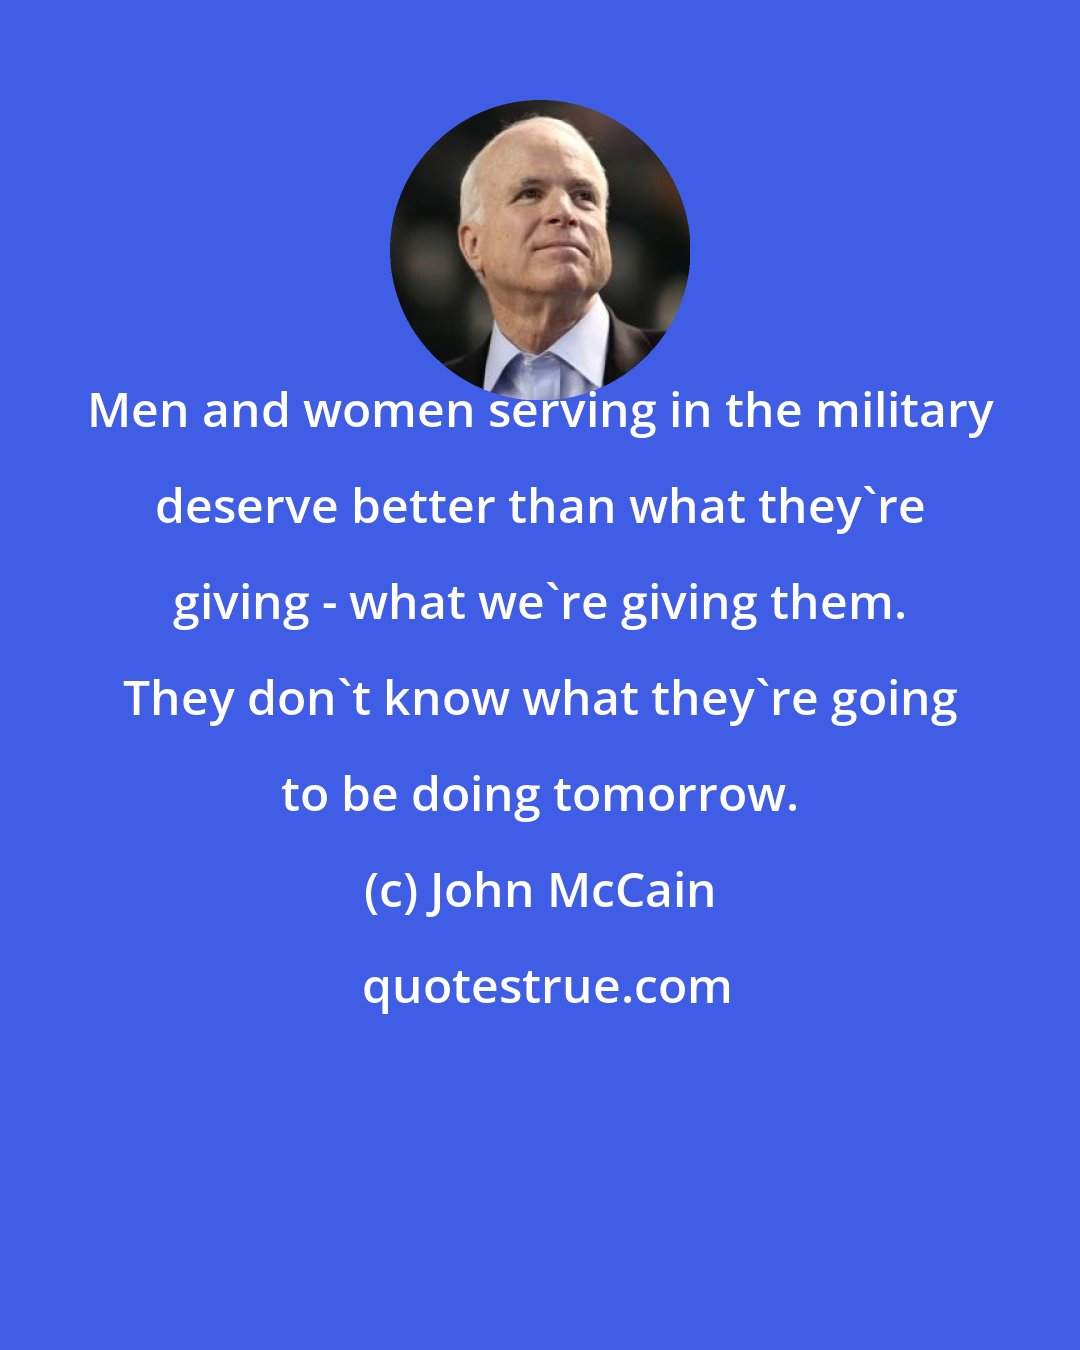 John McCain: Men and women serving in the military deserve better than what they're giving - what we're giving them. They don't know what they're going to be doing tomorrow.